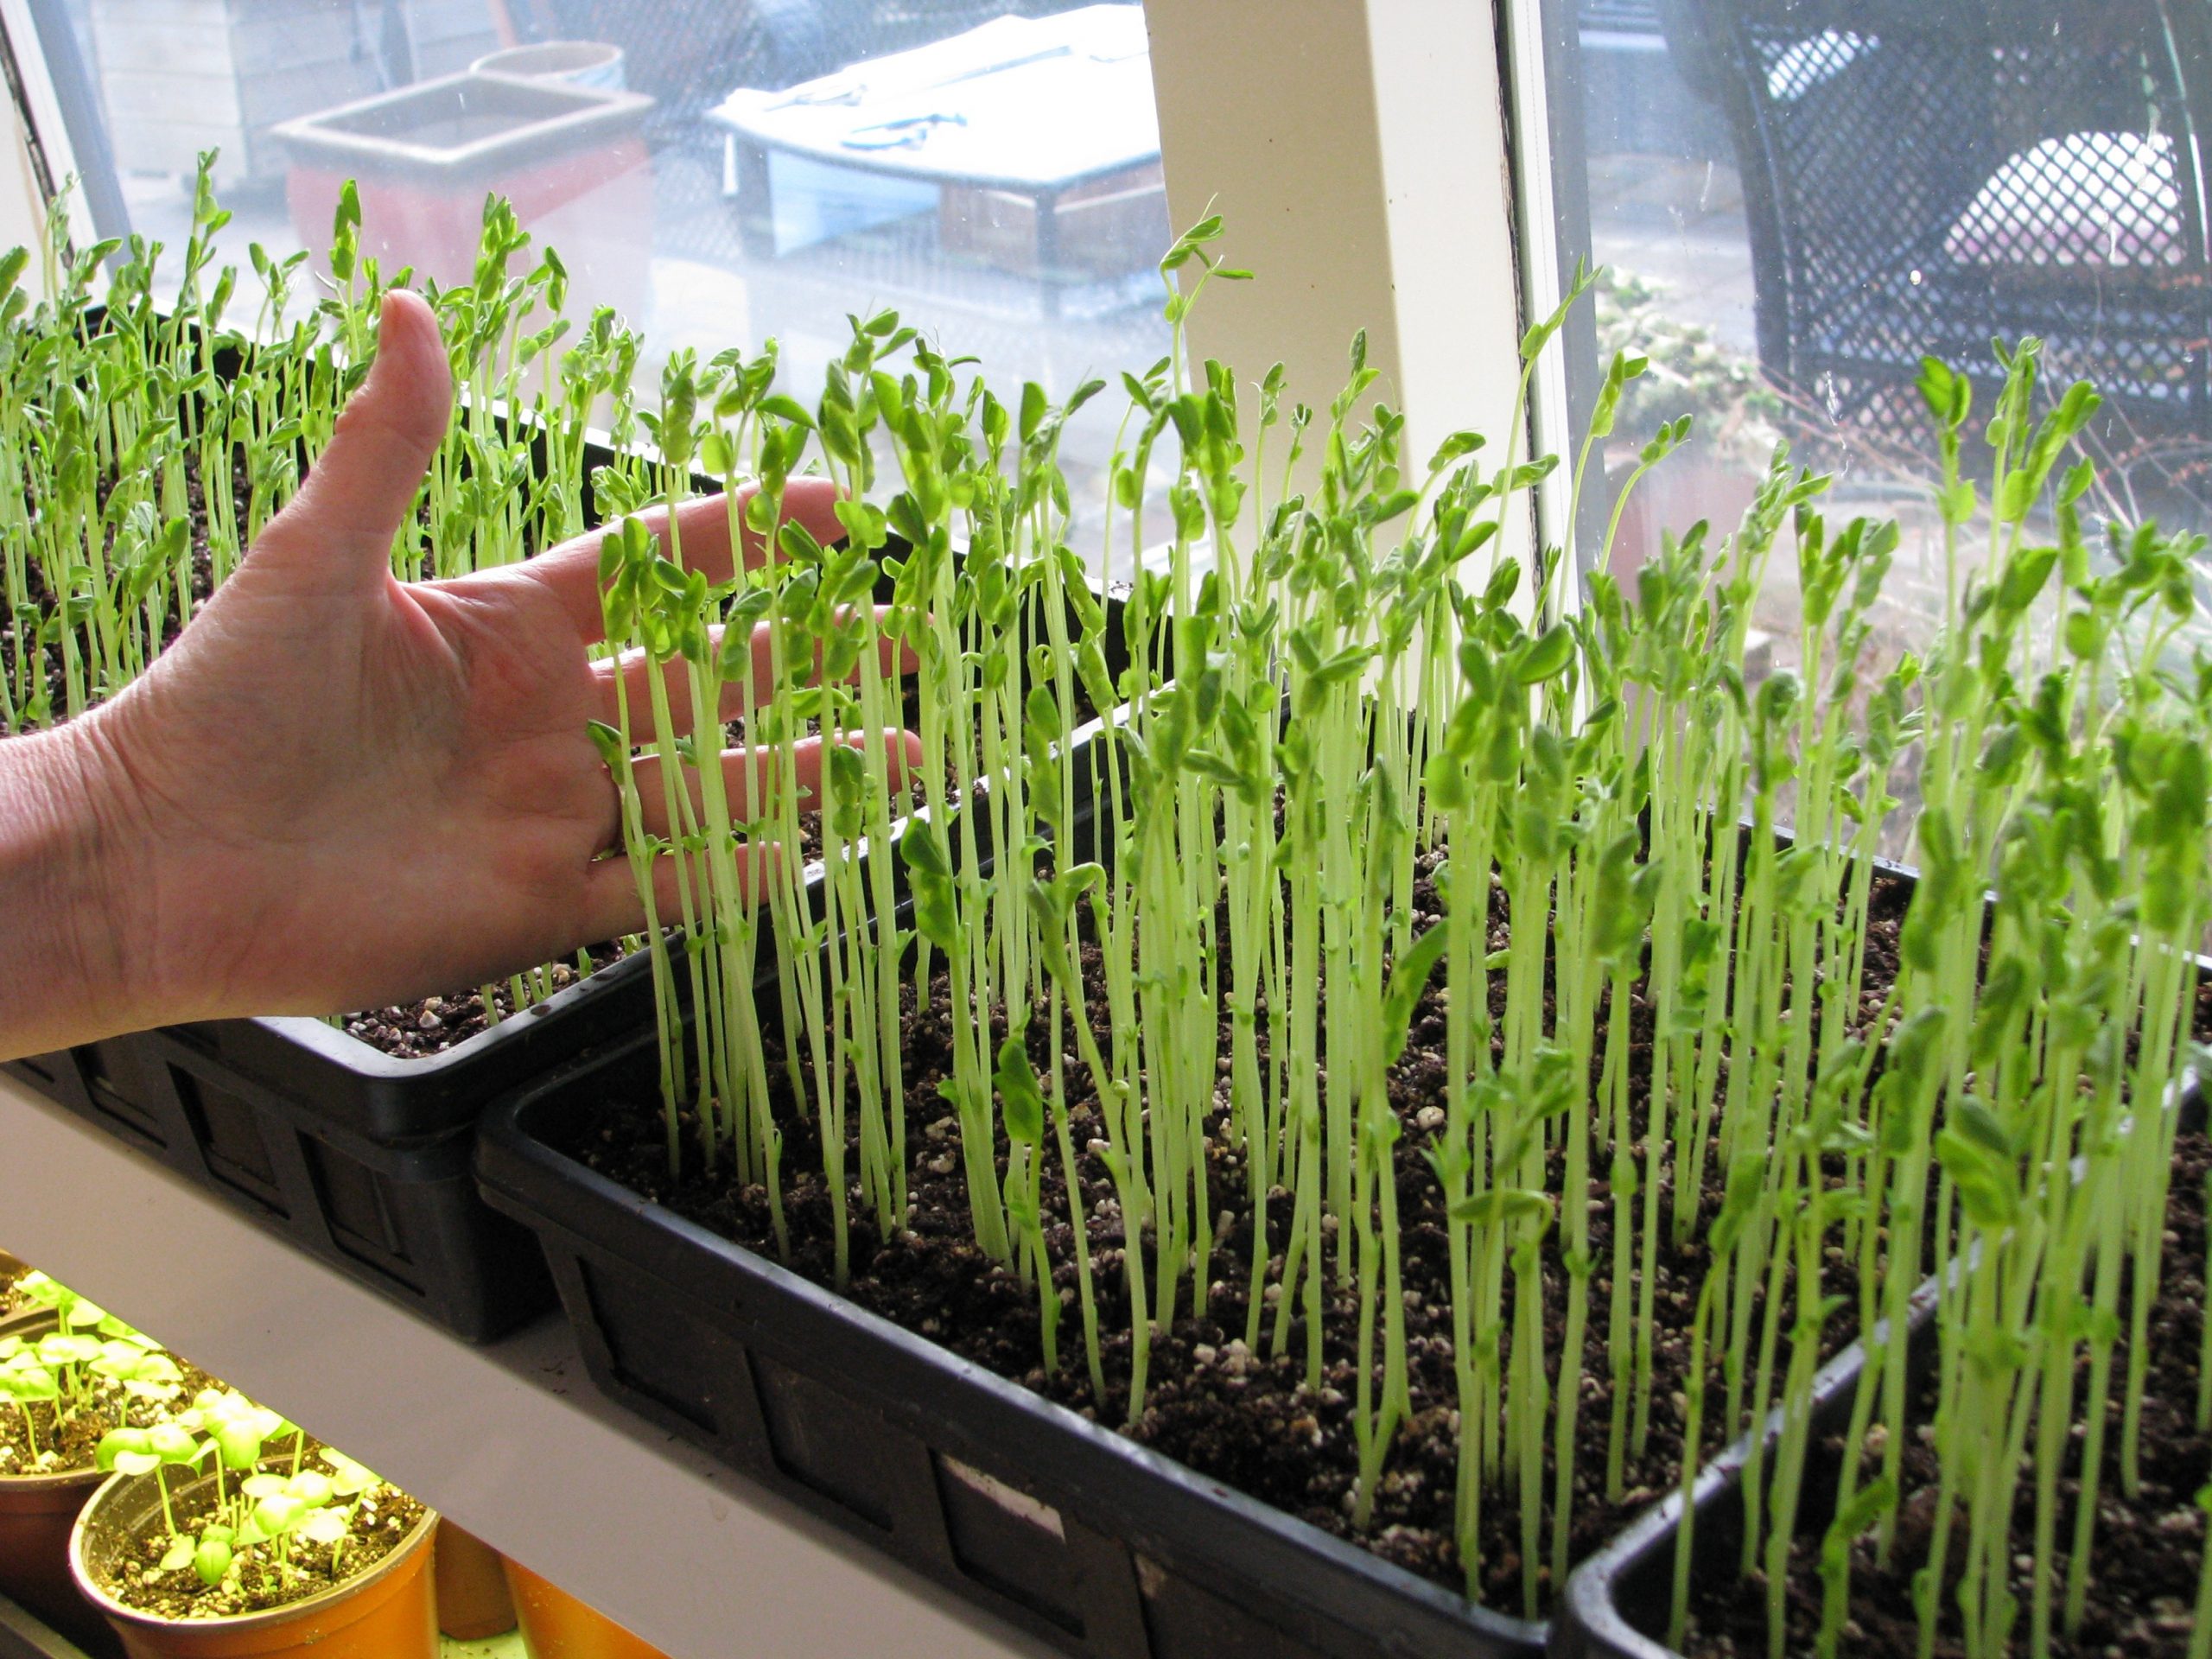 Pea sprouts growing